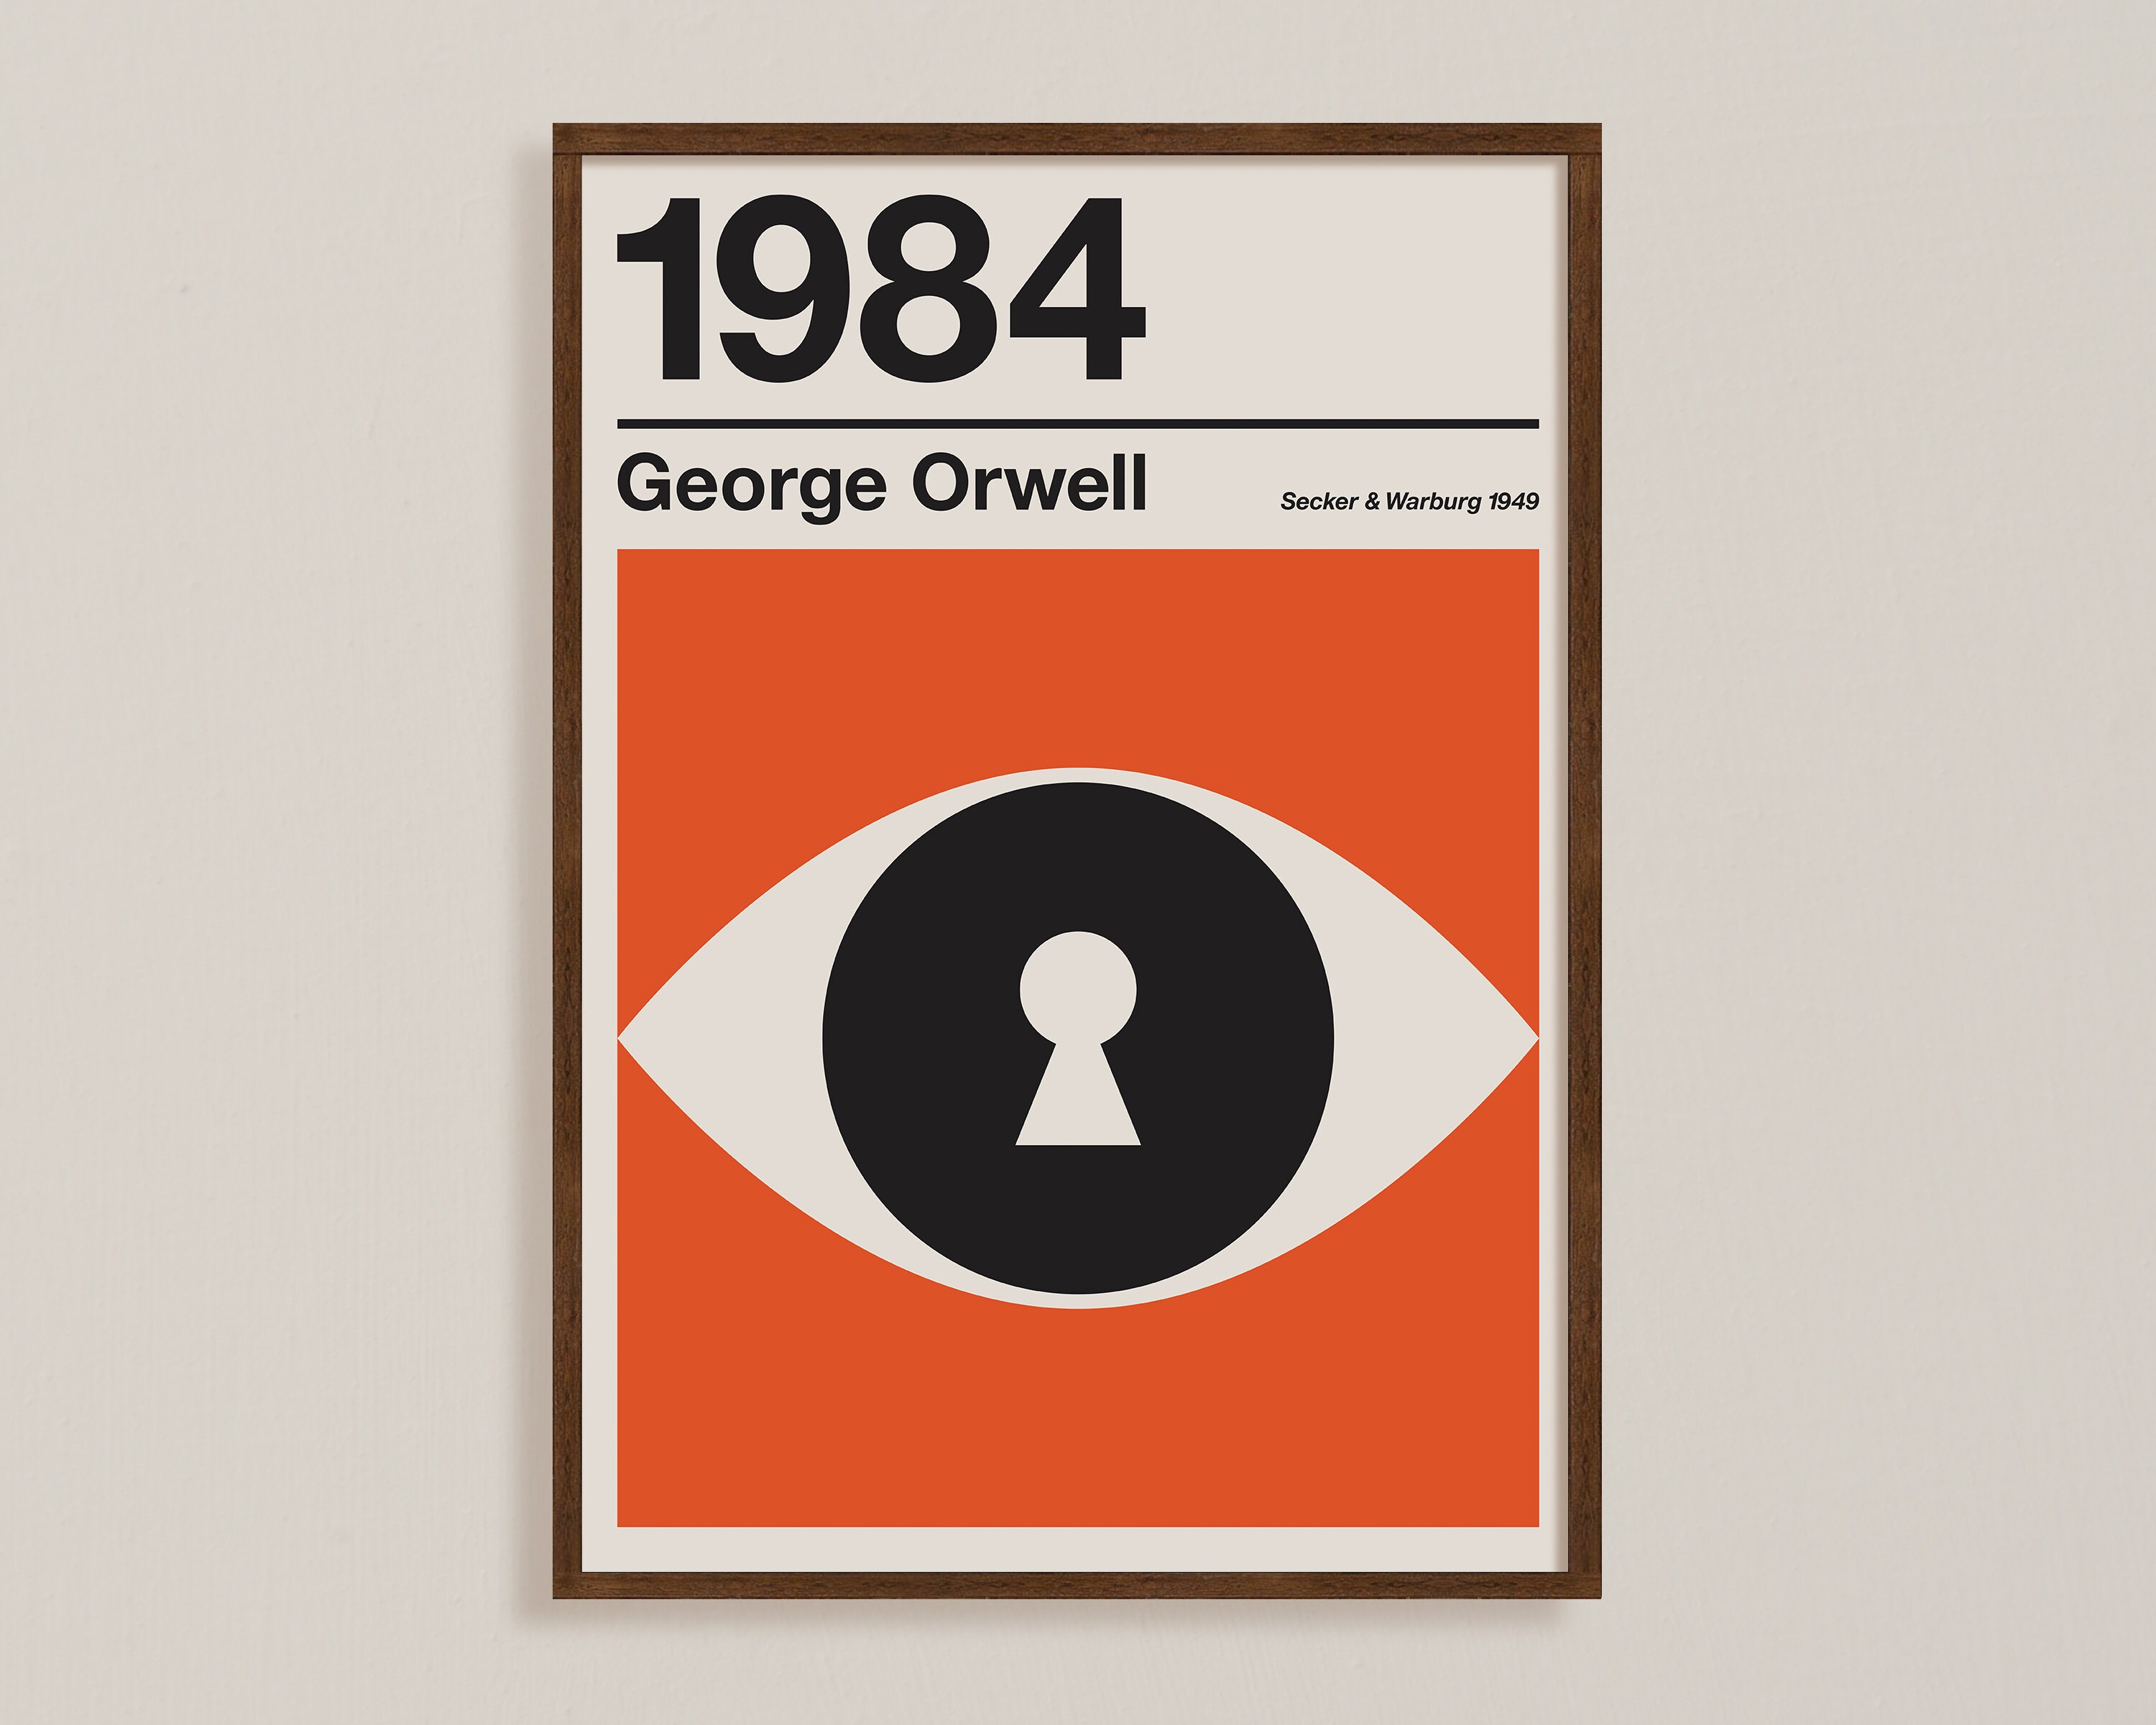 George Orwell 1984 Photographic Print for Sale by orinemaster